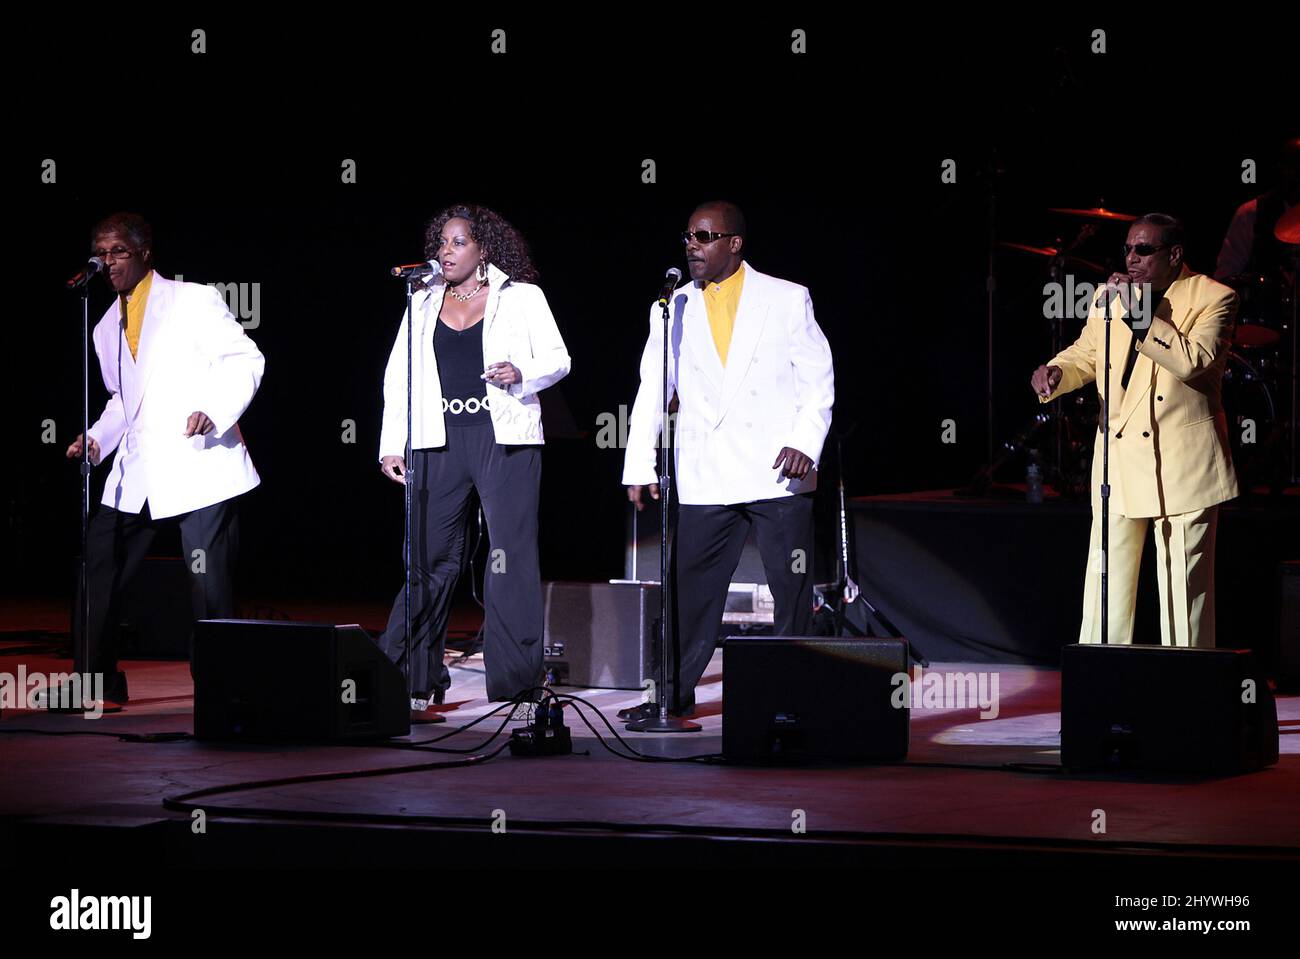 Fred Parris and The Five Satins during Tony DeLauro's Original NY Doo Wopp Show, held at the Bethel Woods Center for the Arts, New York. Stock Photo